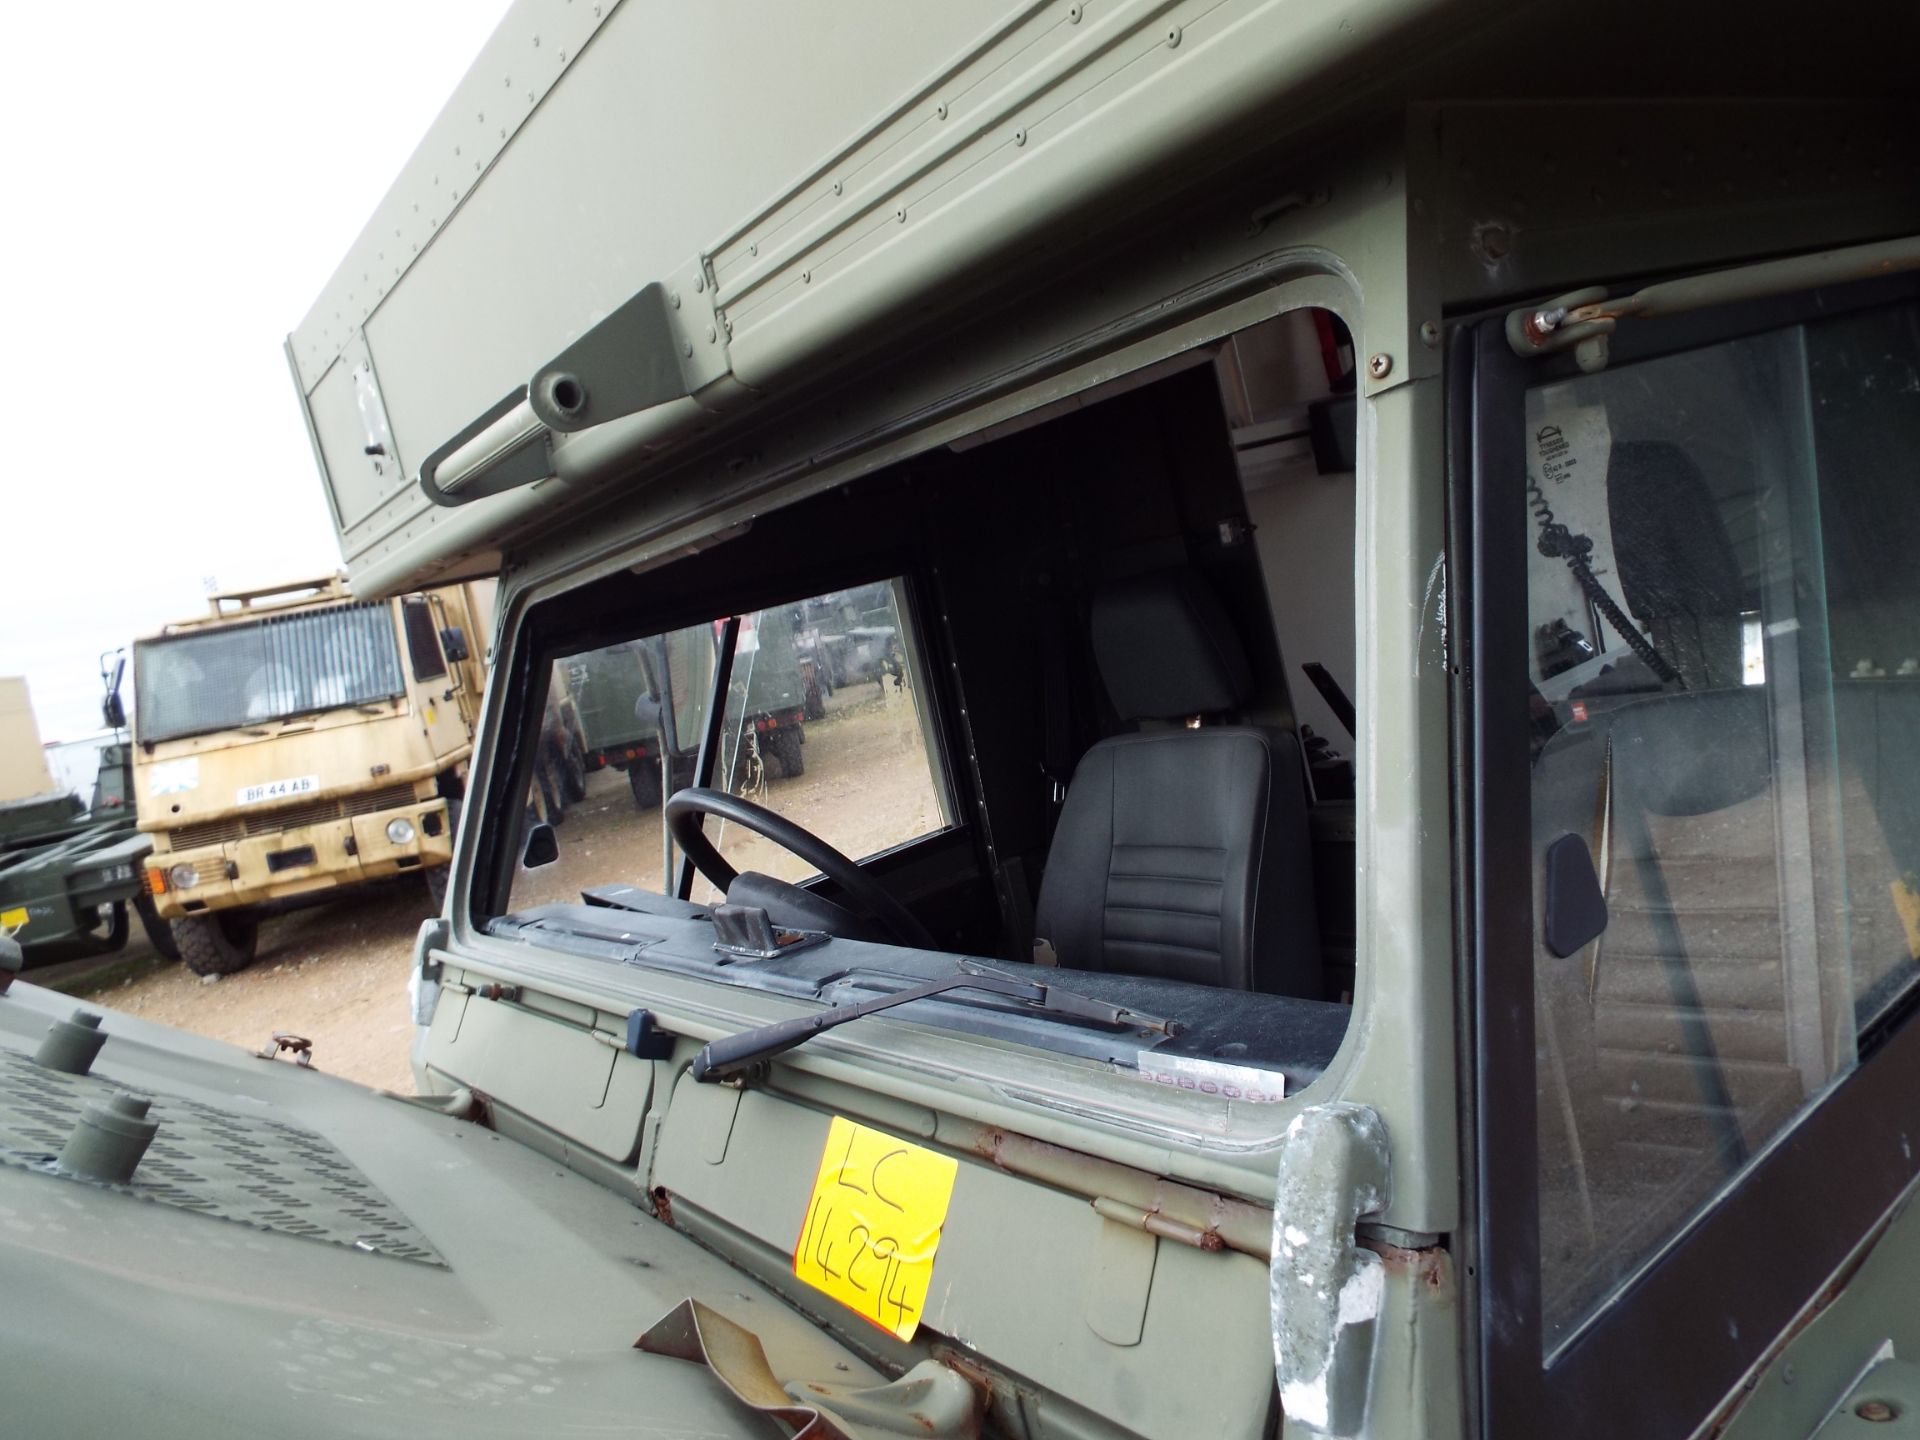 Military Specification Land Rover Wolf 130 ambulance - Image 26 of 28